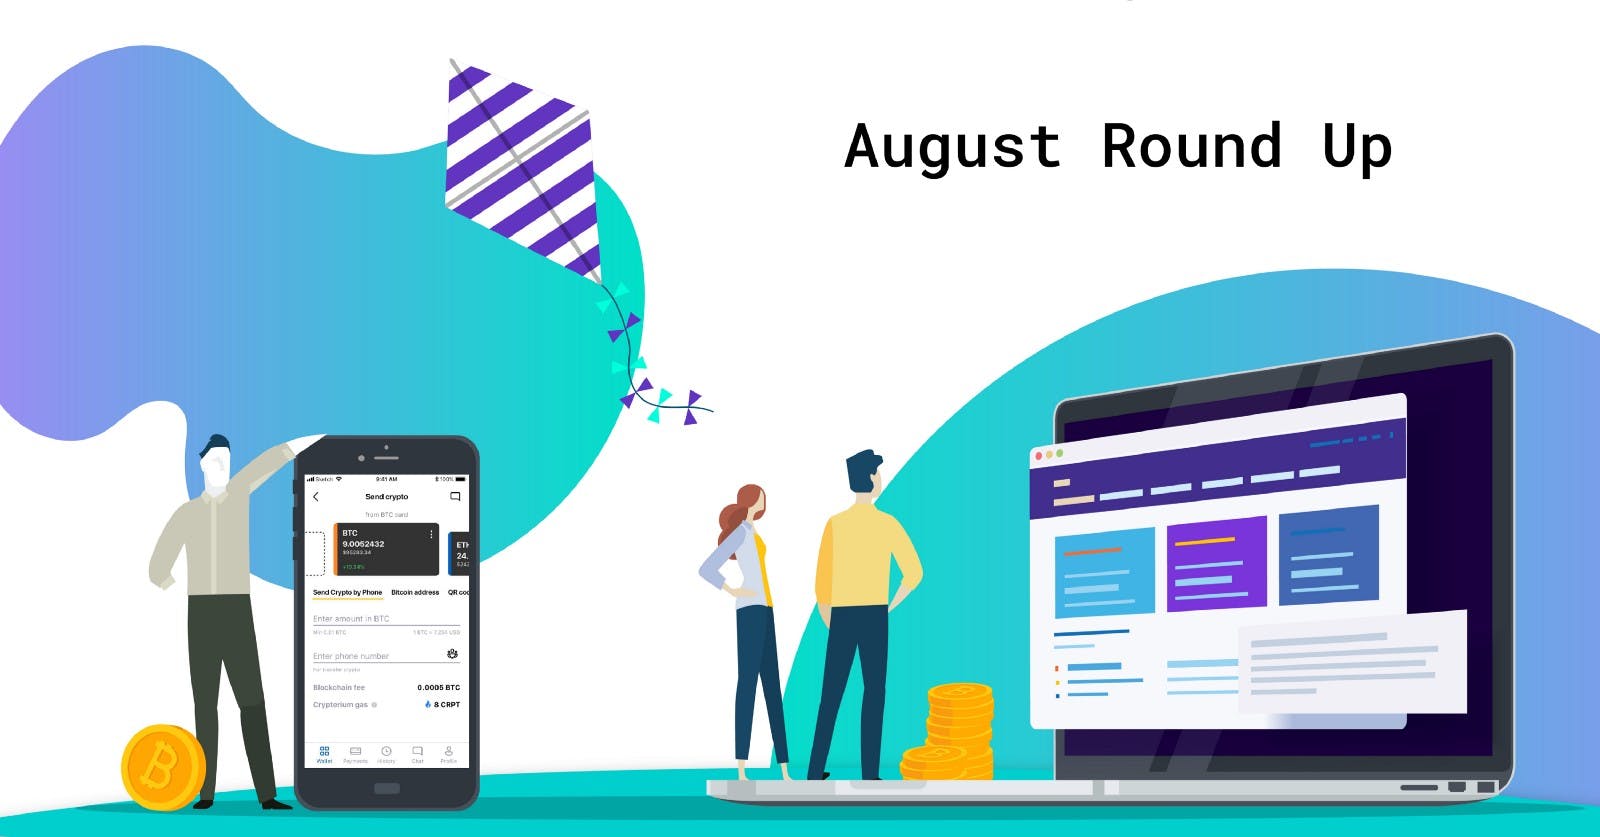 /crypterium-roundup-for-august-new-killer-app-features-in-action-acba4eab3487 feature image